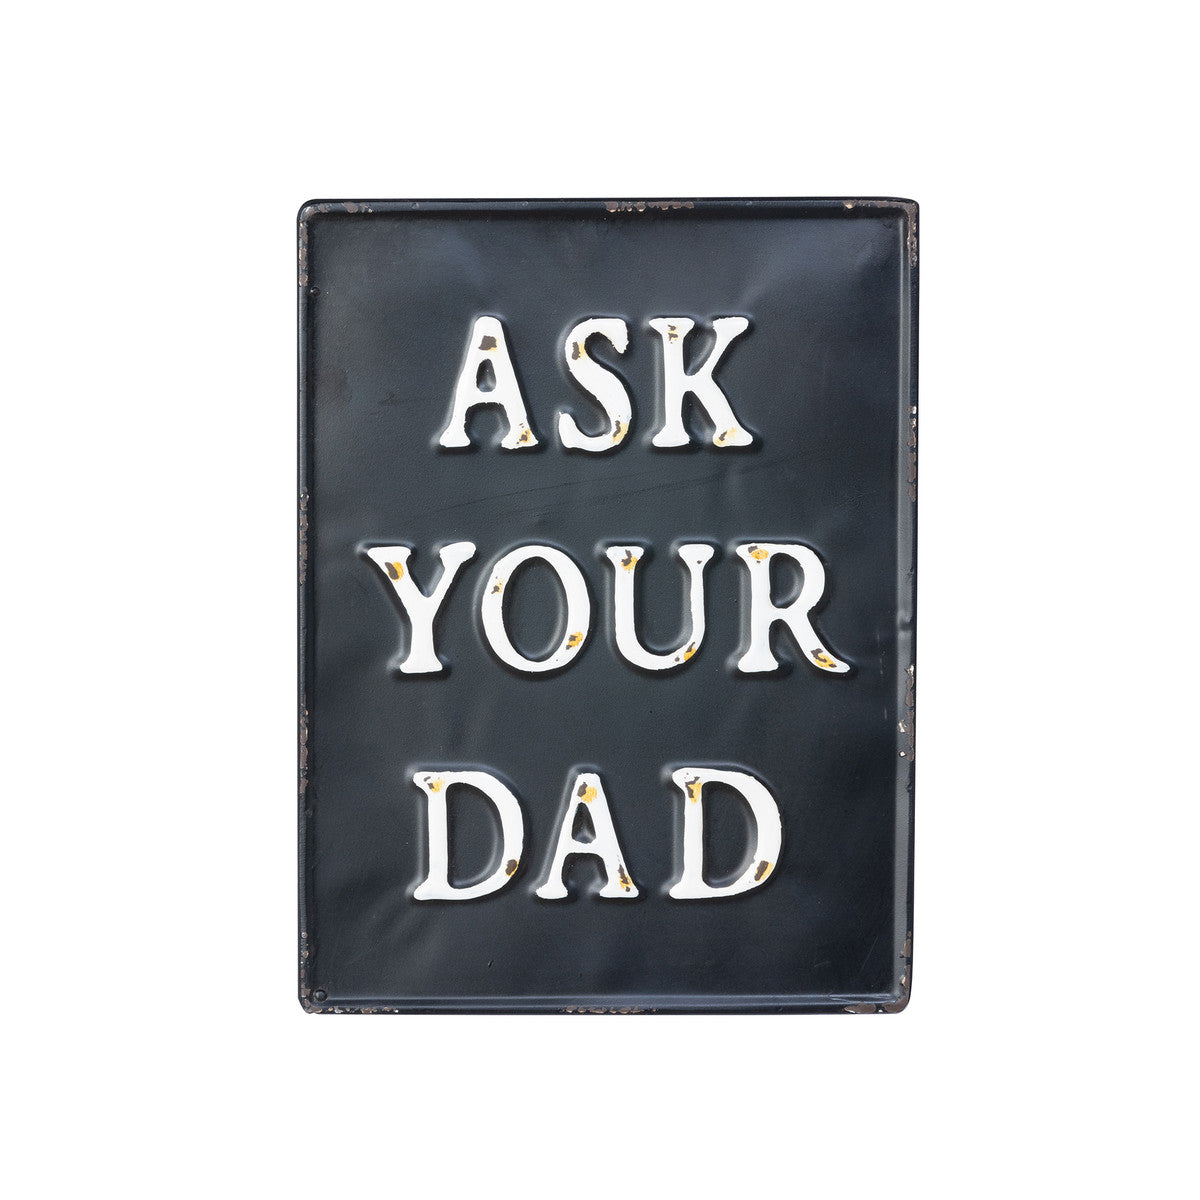 Call Your Mom/Ask Your Dad Metal Signs